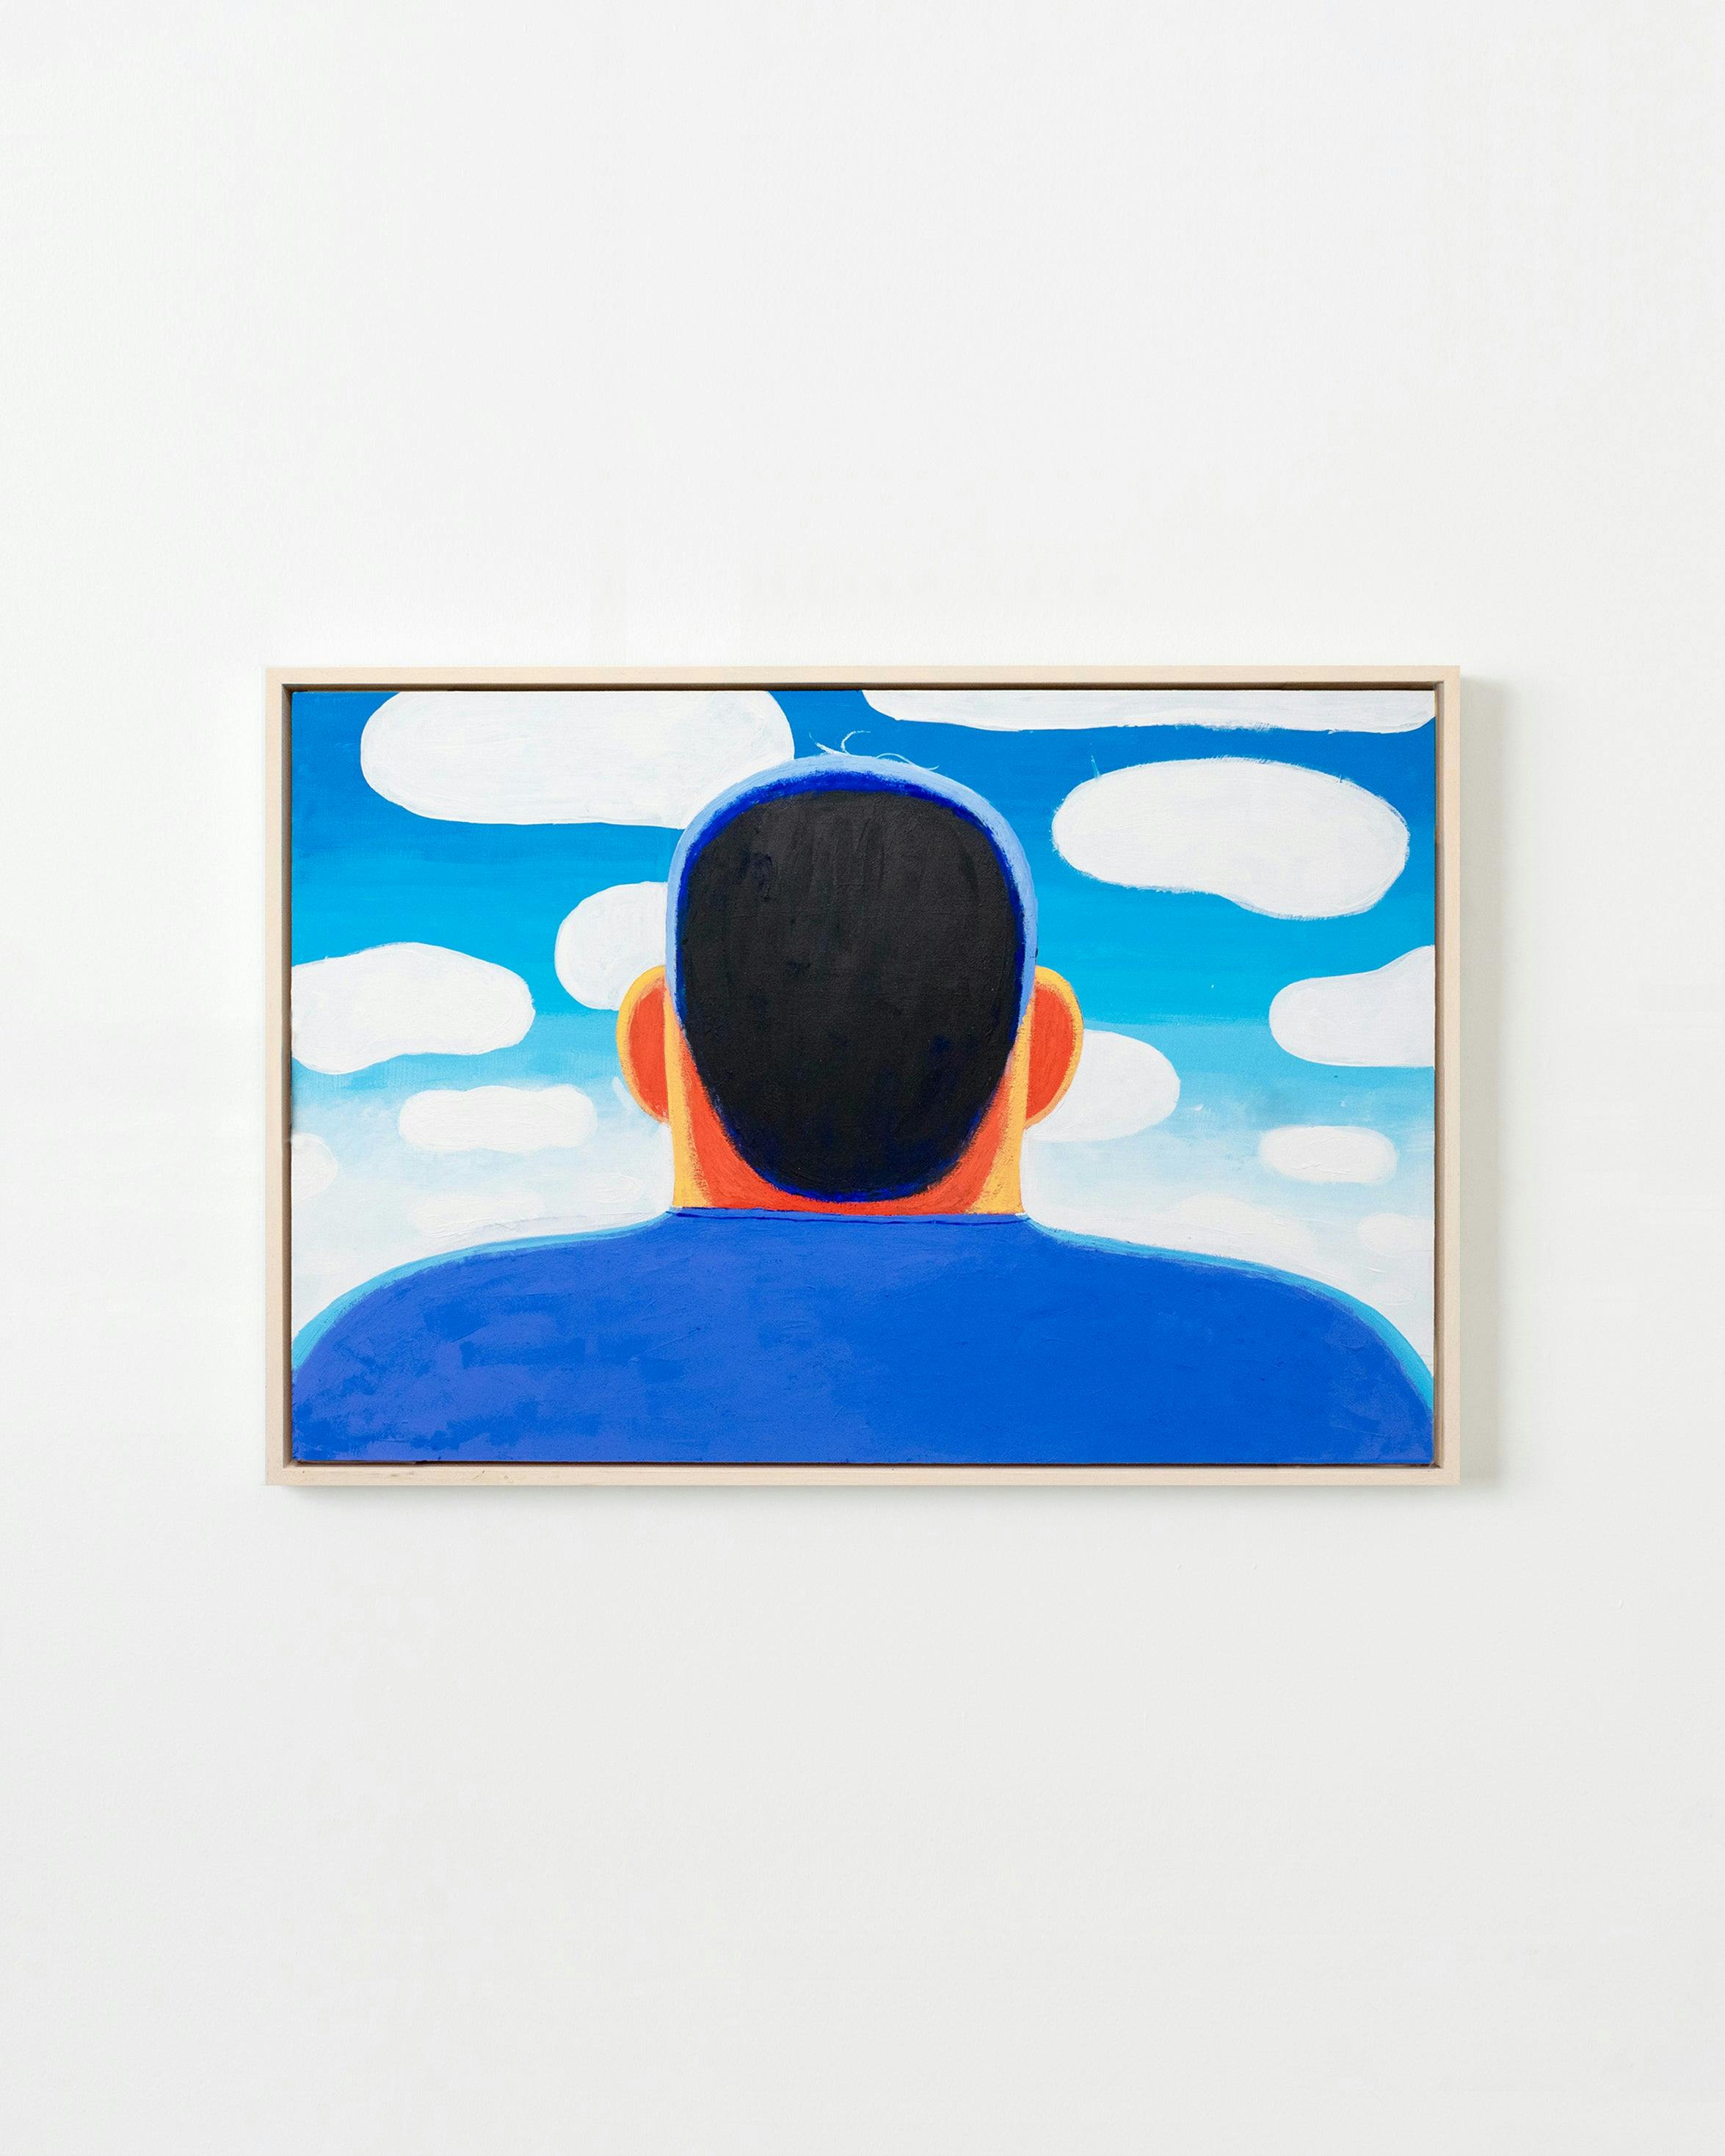 Painting by Jackson Joyce titled "Head in the Clouds".